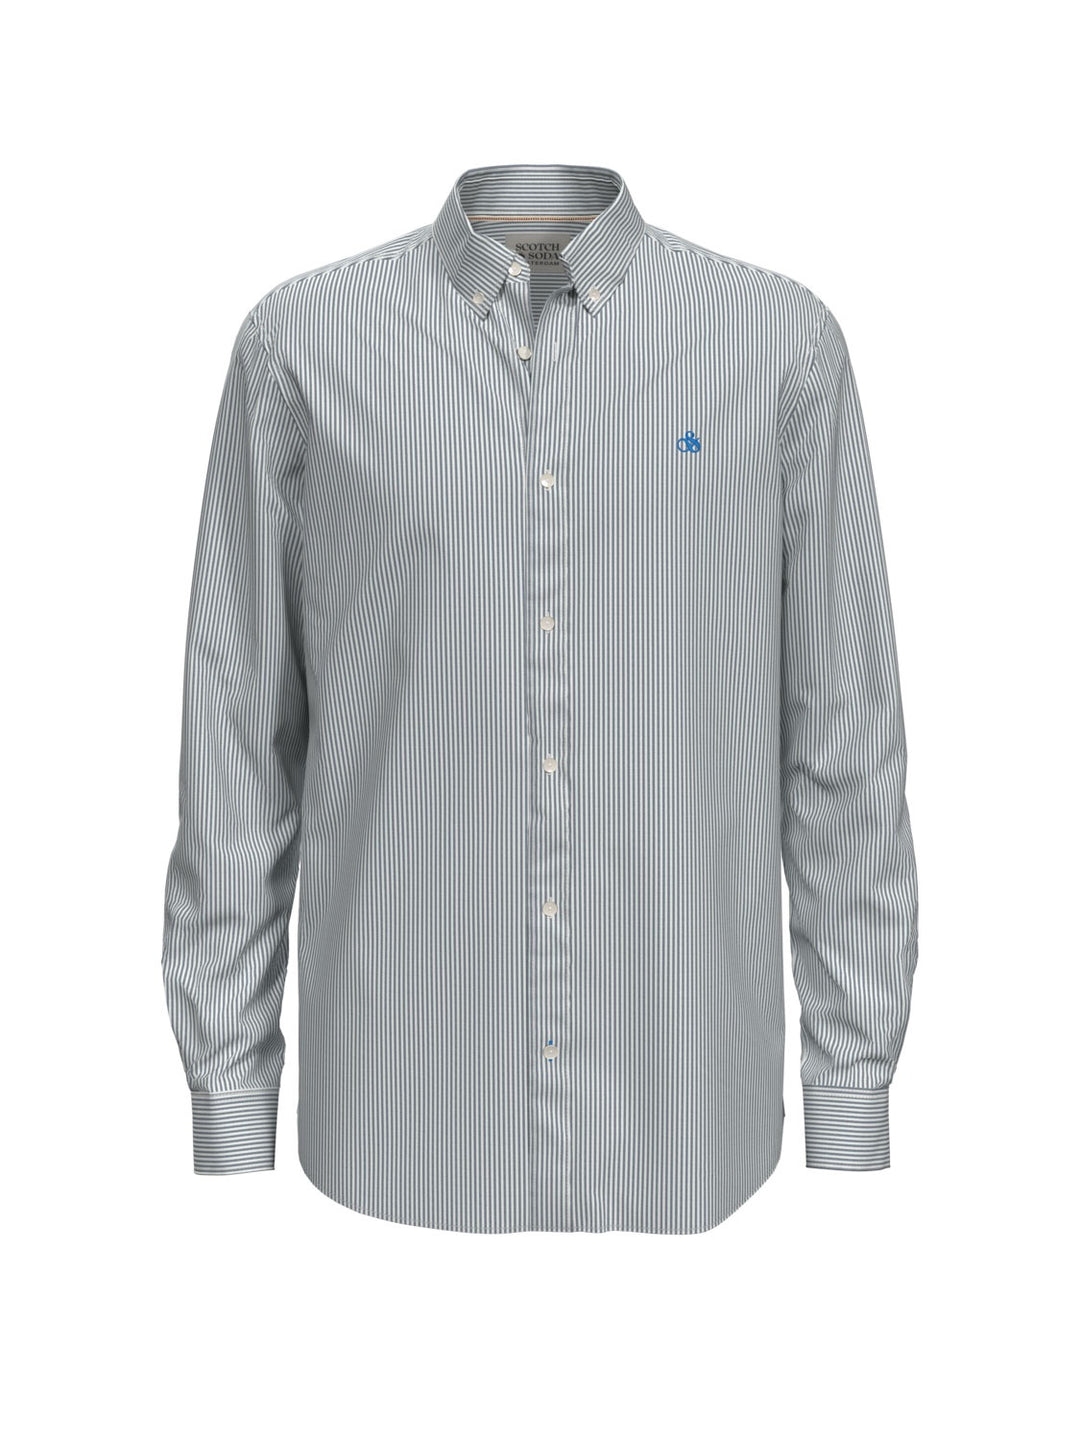 Essential Cotton Oxford Stripe Shirt in Steel Stripe | Buster McGee